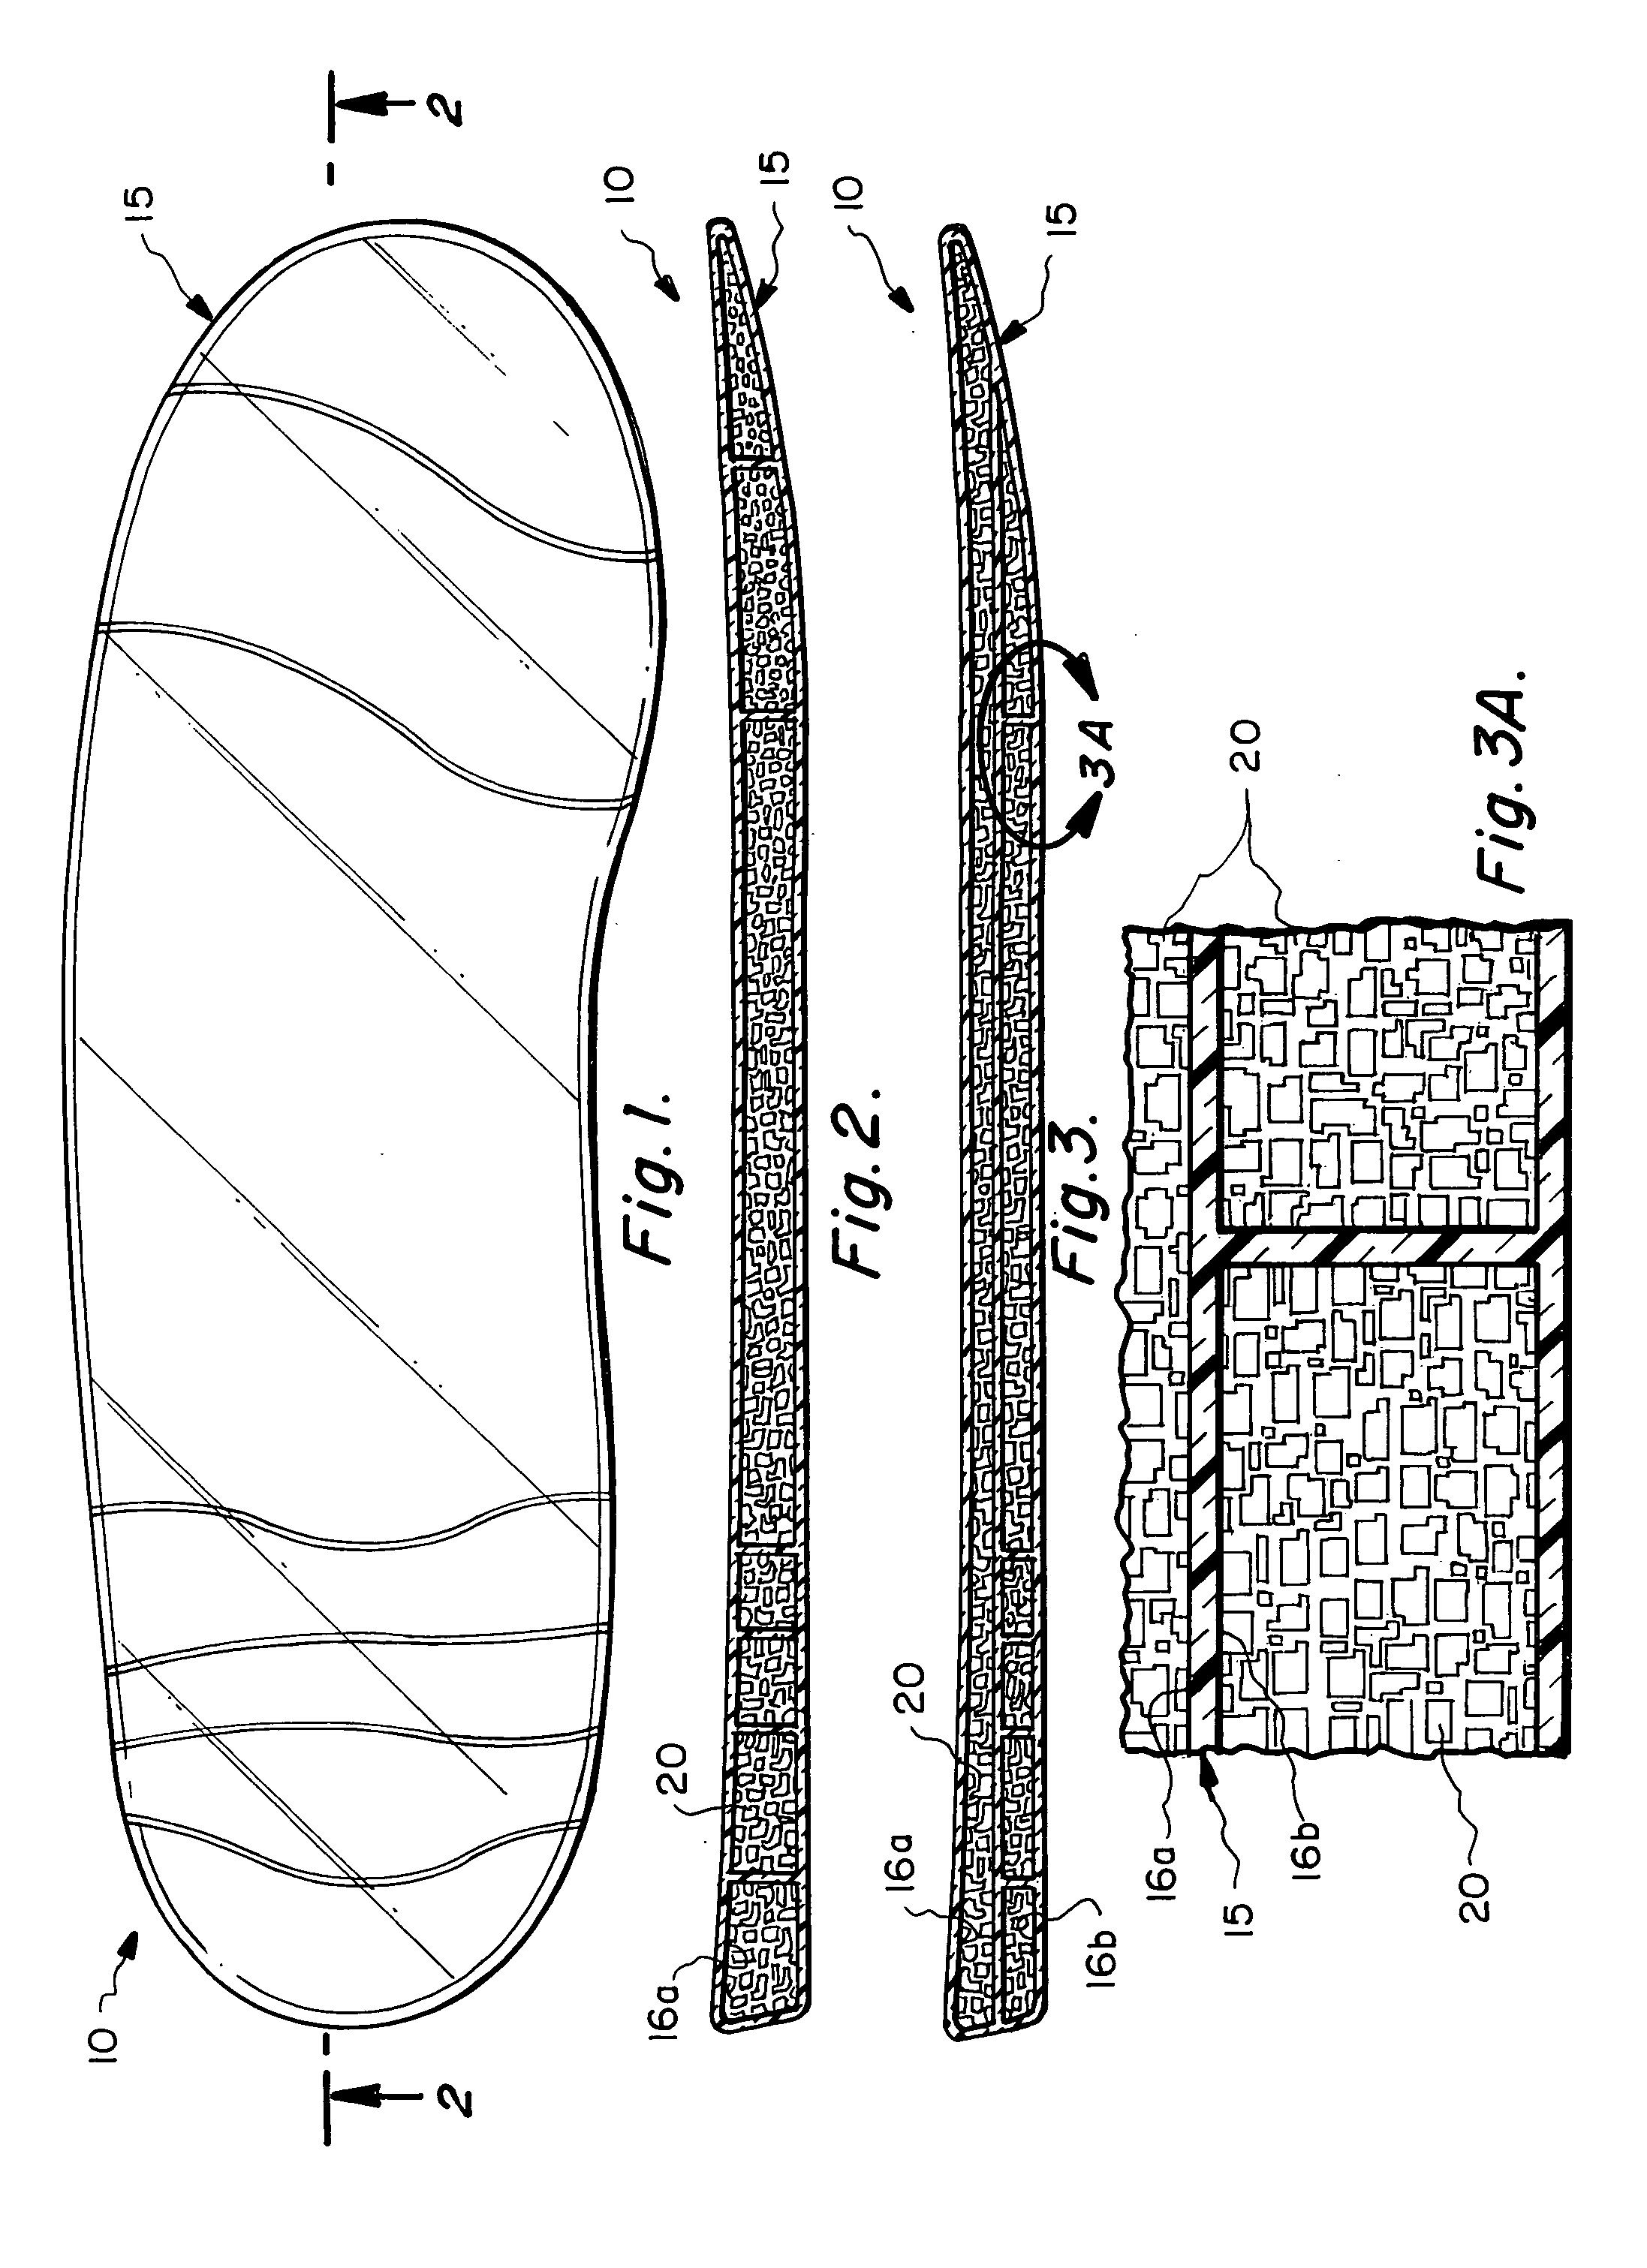 Footwear inserts, including midsoles, sockliners, footbeds and/or upper components using granular ethyl vinyl acetate (EVA) and method of manufacture